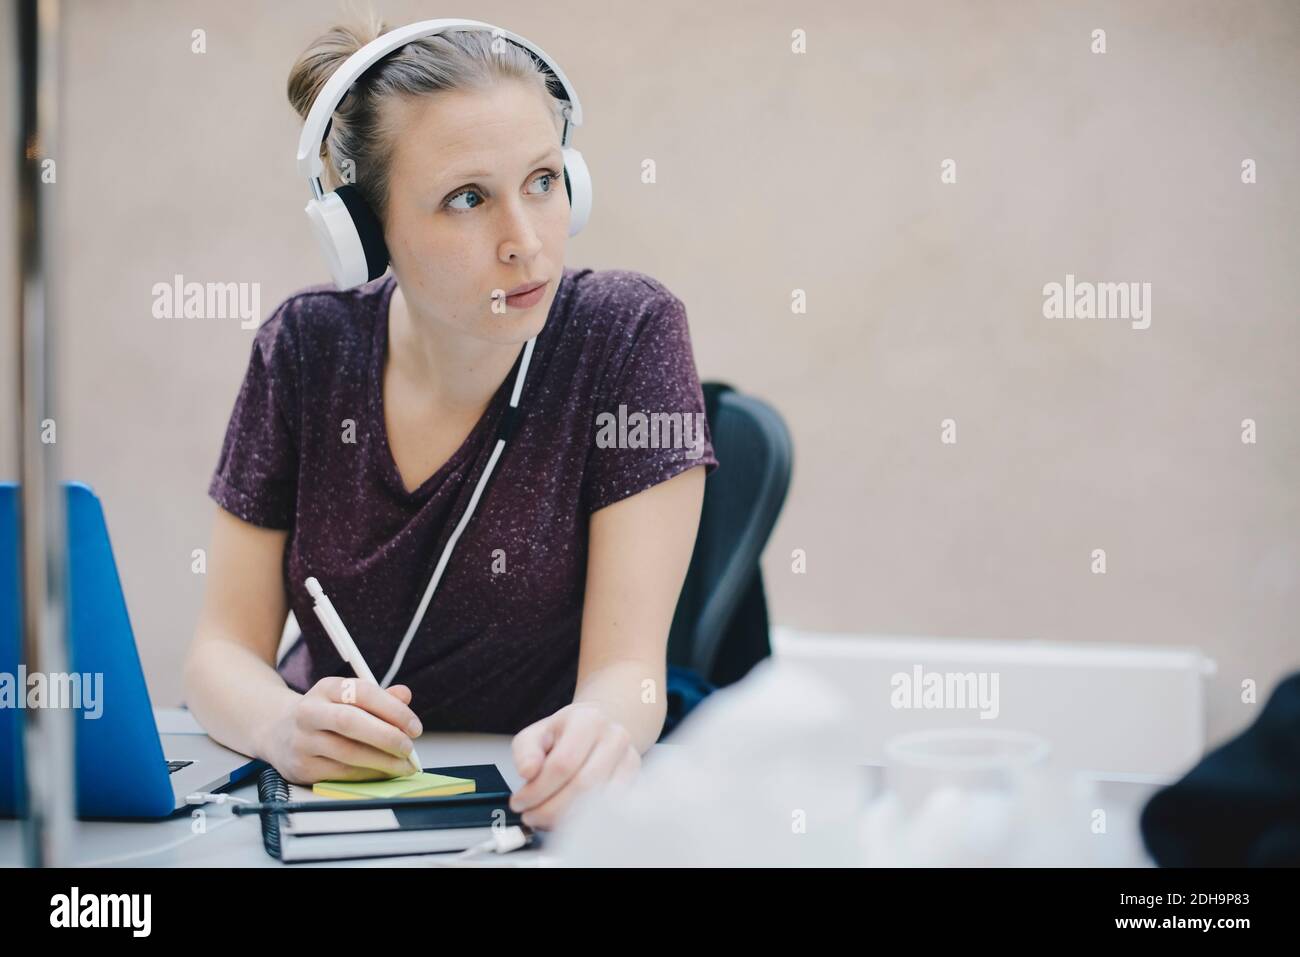 Female computer programmer looking away while writing on adhesive note in office Stock Photo